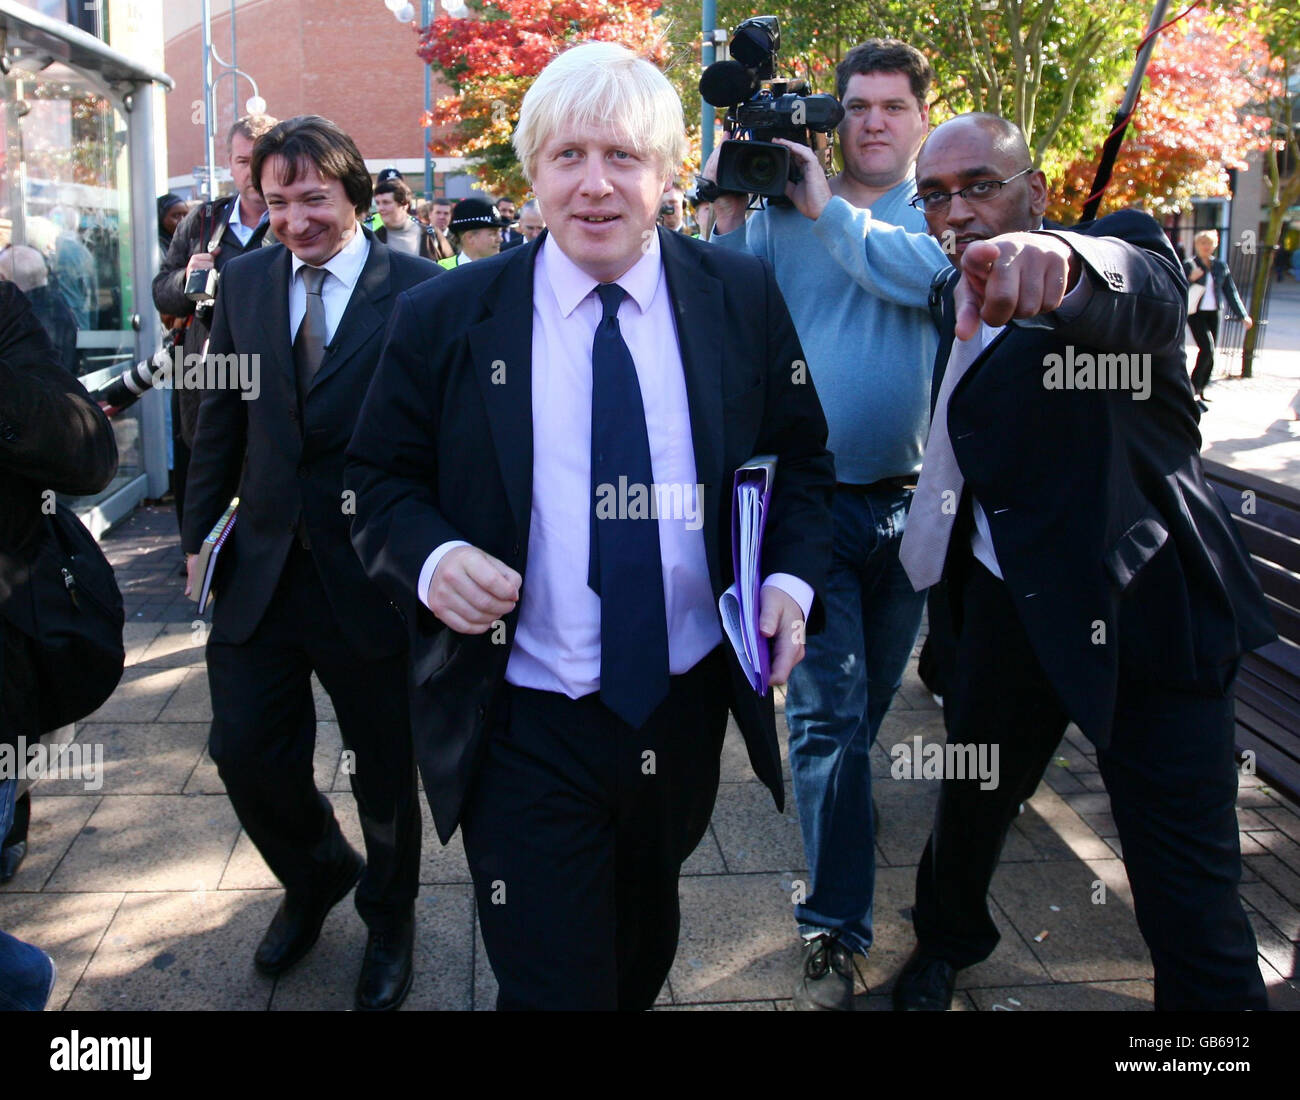 Mayor of London Boris Johnson (centre) during a walkabout in Bexleyheath town centre, Kent, after announcing plans for 30 locations to benefit from new transport policing teams. Stock Photo